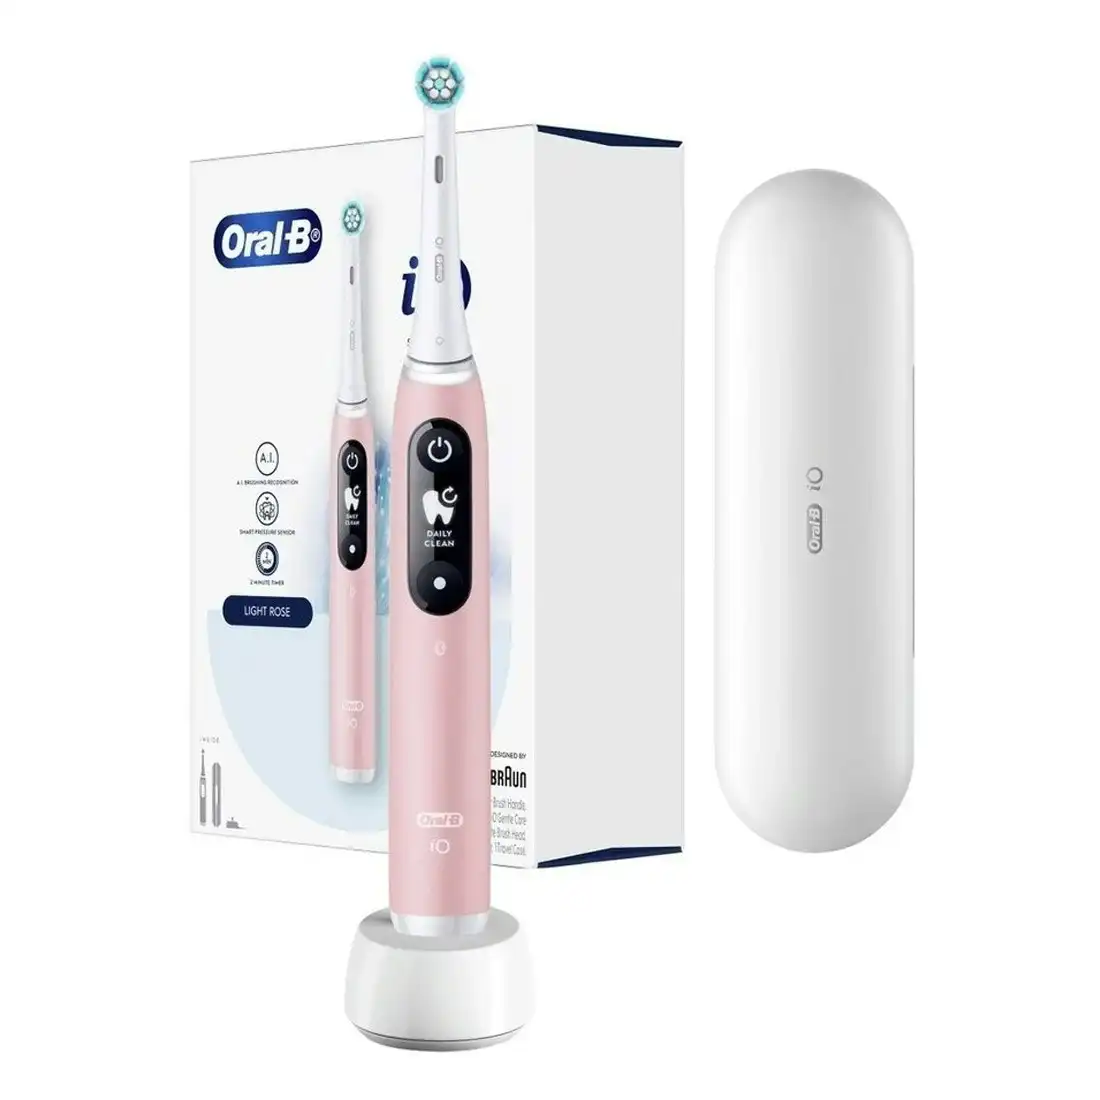 Oral-B iO 6 Series Rechargeable Toothbrush w/ Travel Case - White